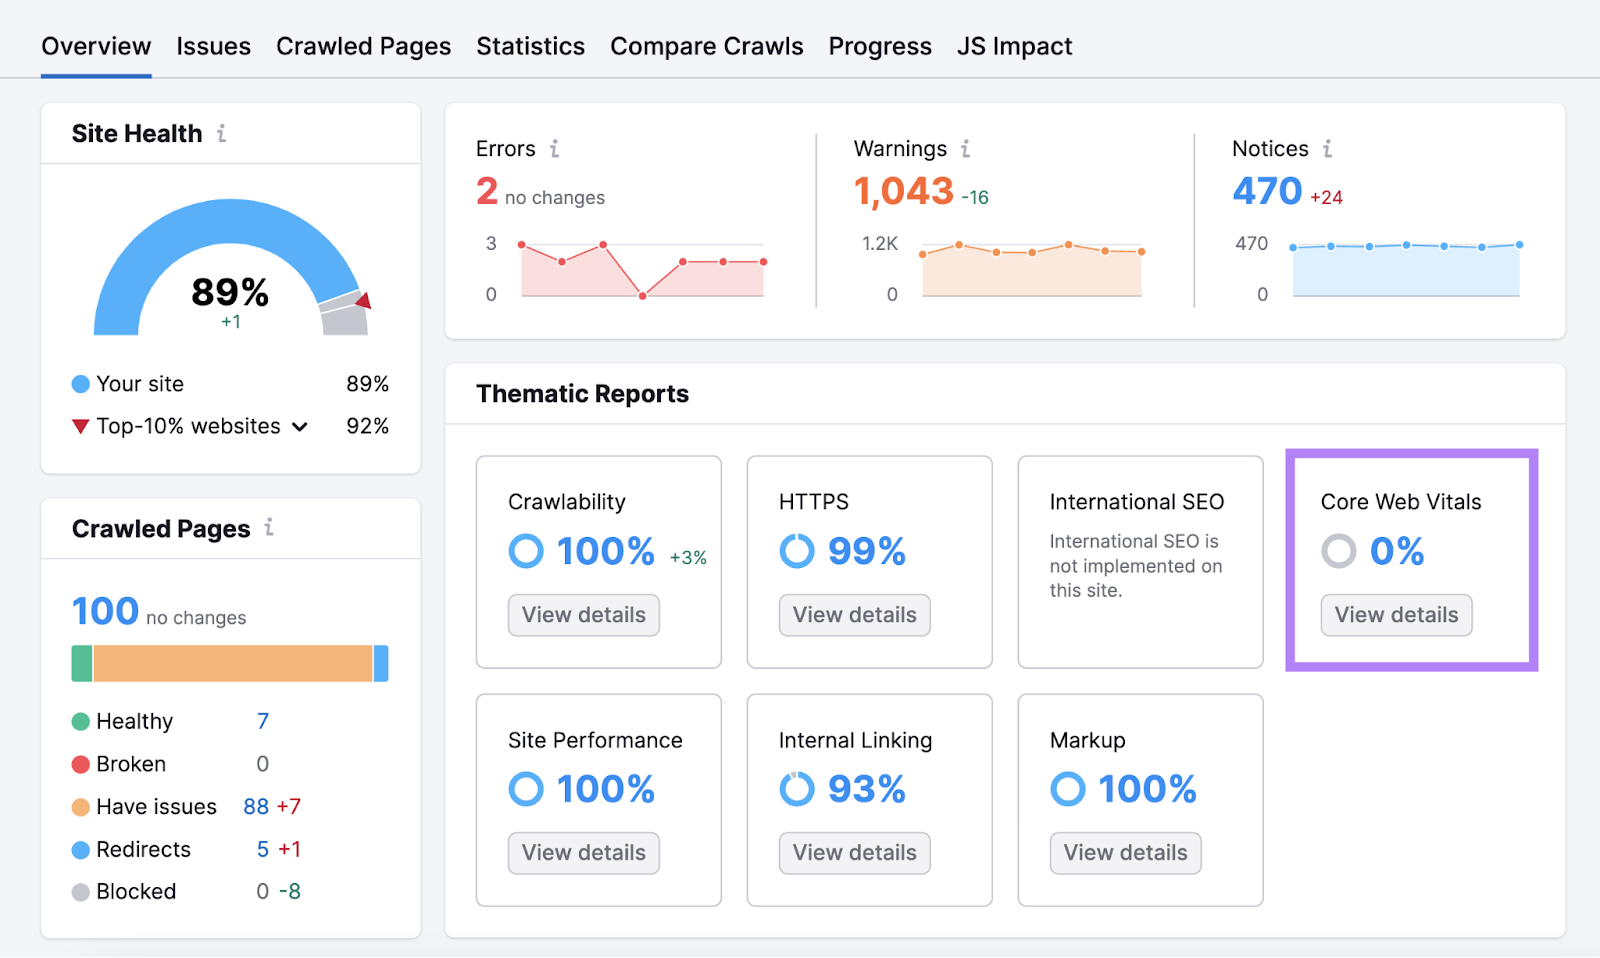 "Core Web Vitals" container  highlighted successful  the Site Audit's Overview dashboard